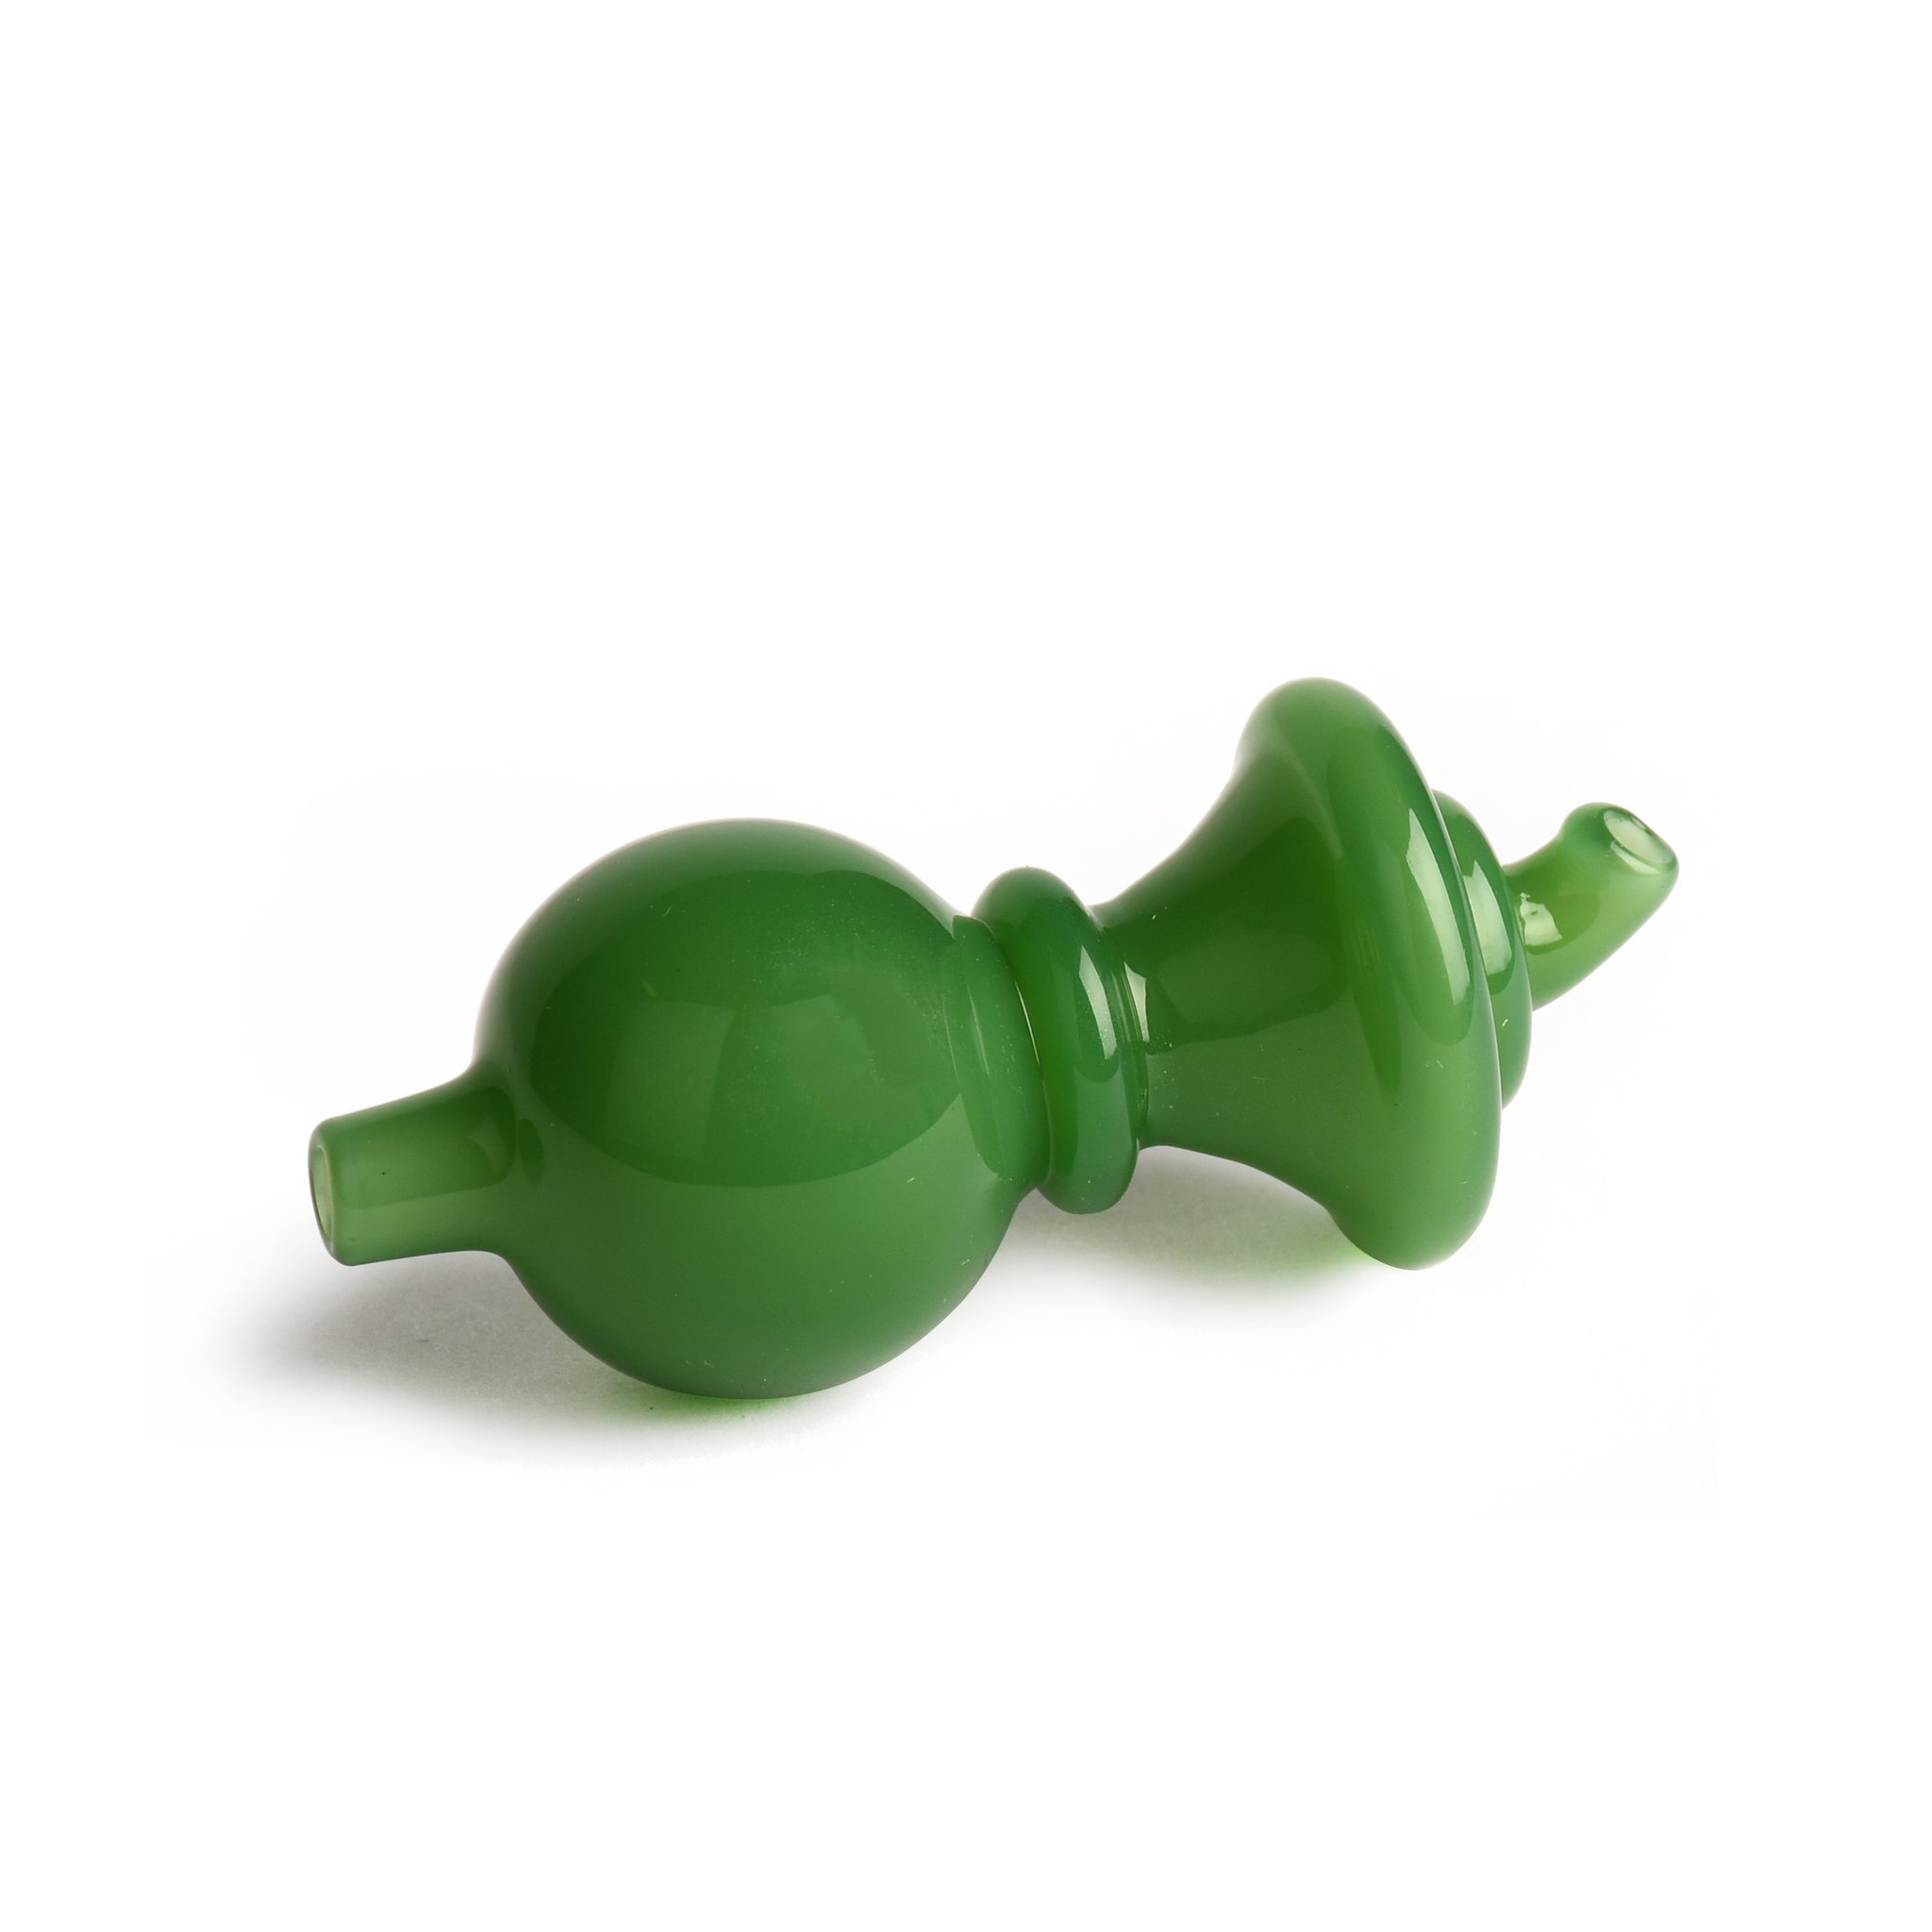 Red Eye Glass Reversible Carb Cap with Bubble & Directional Caps - Jade Green